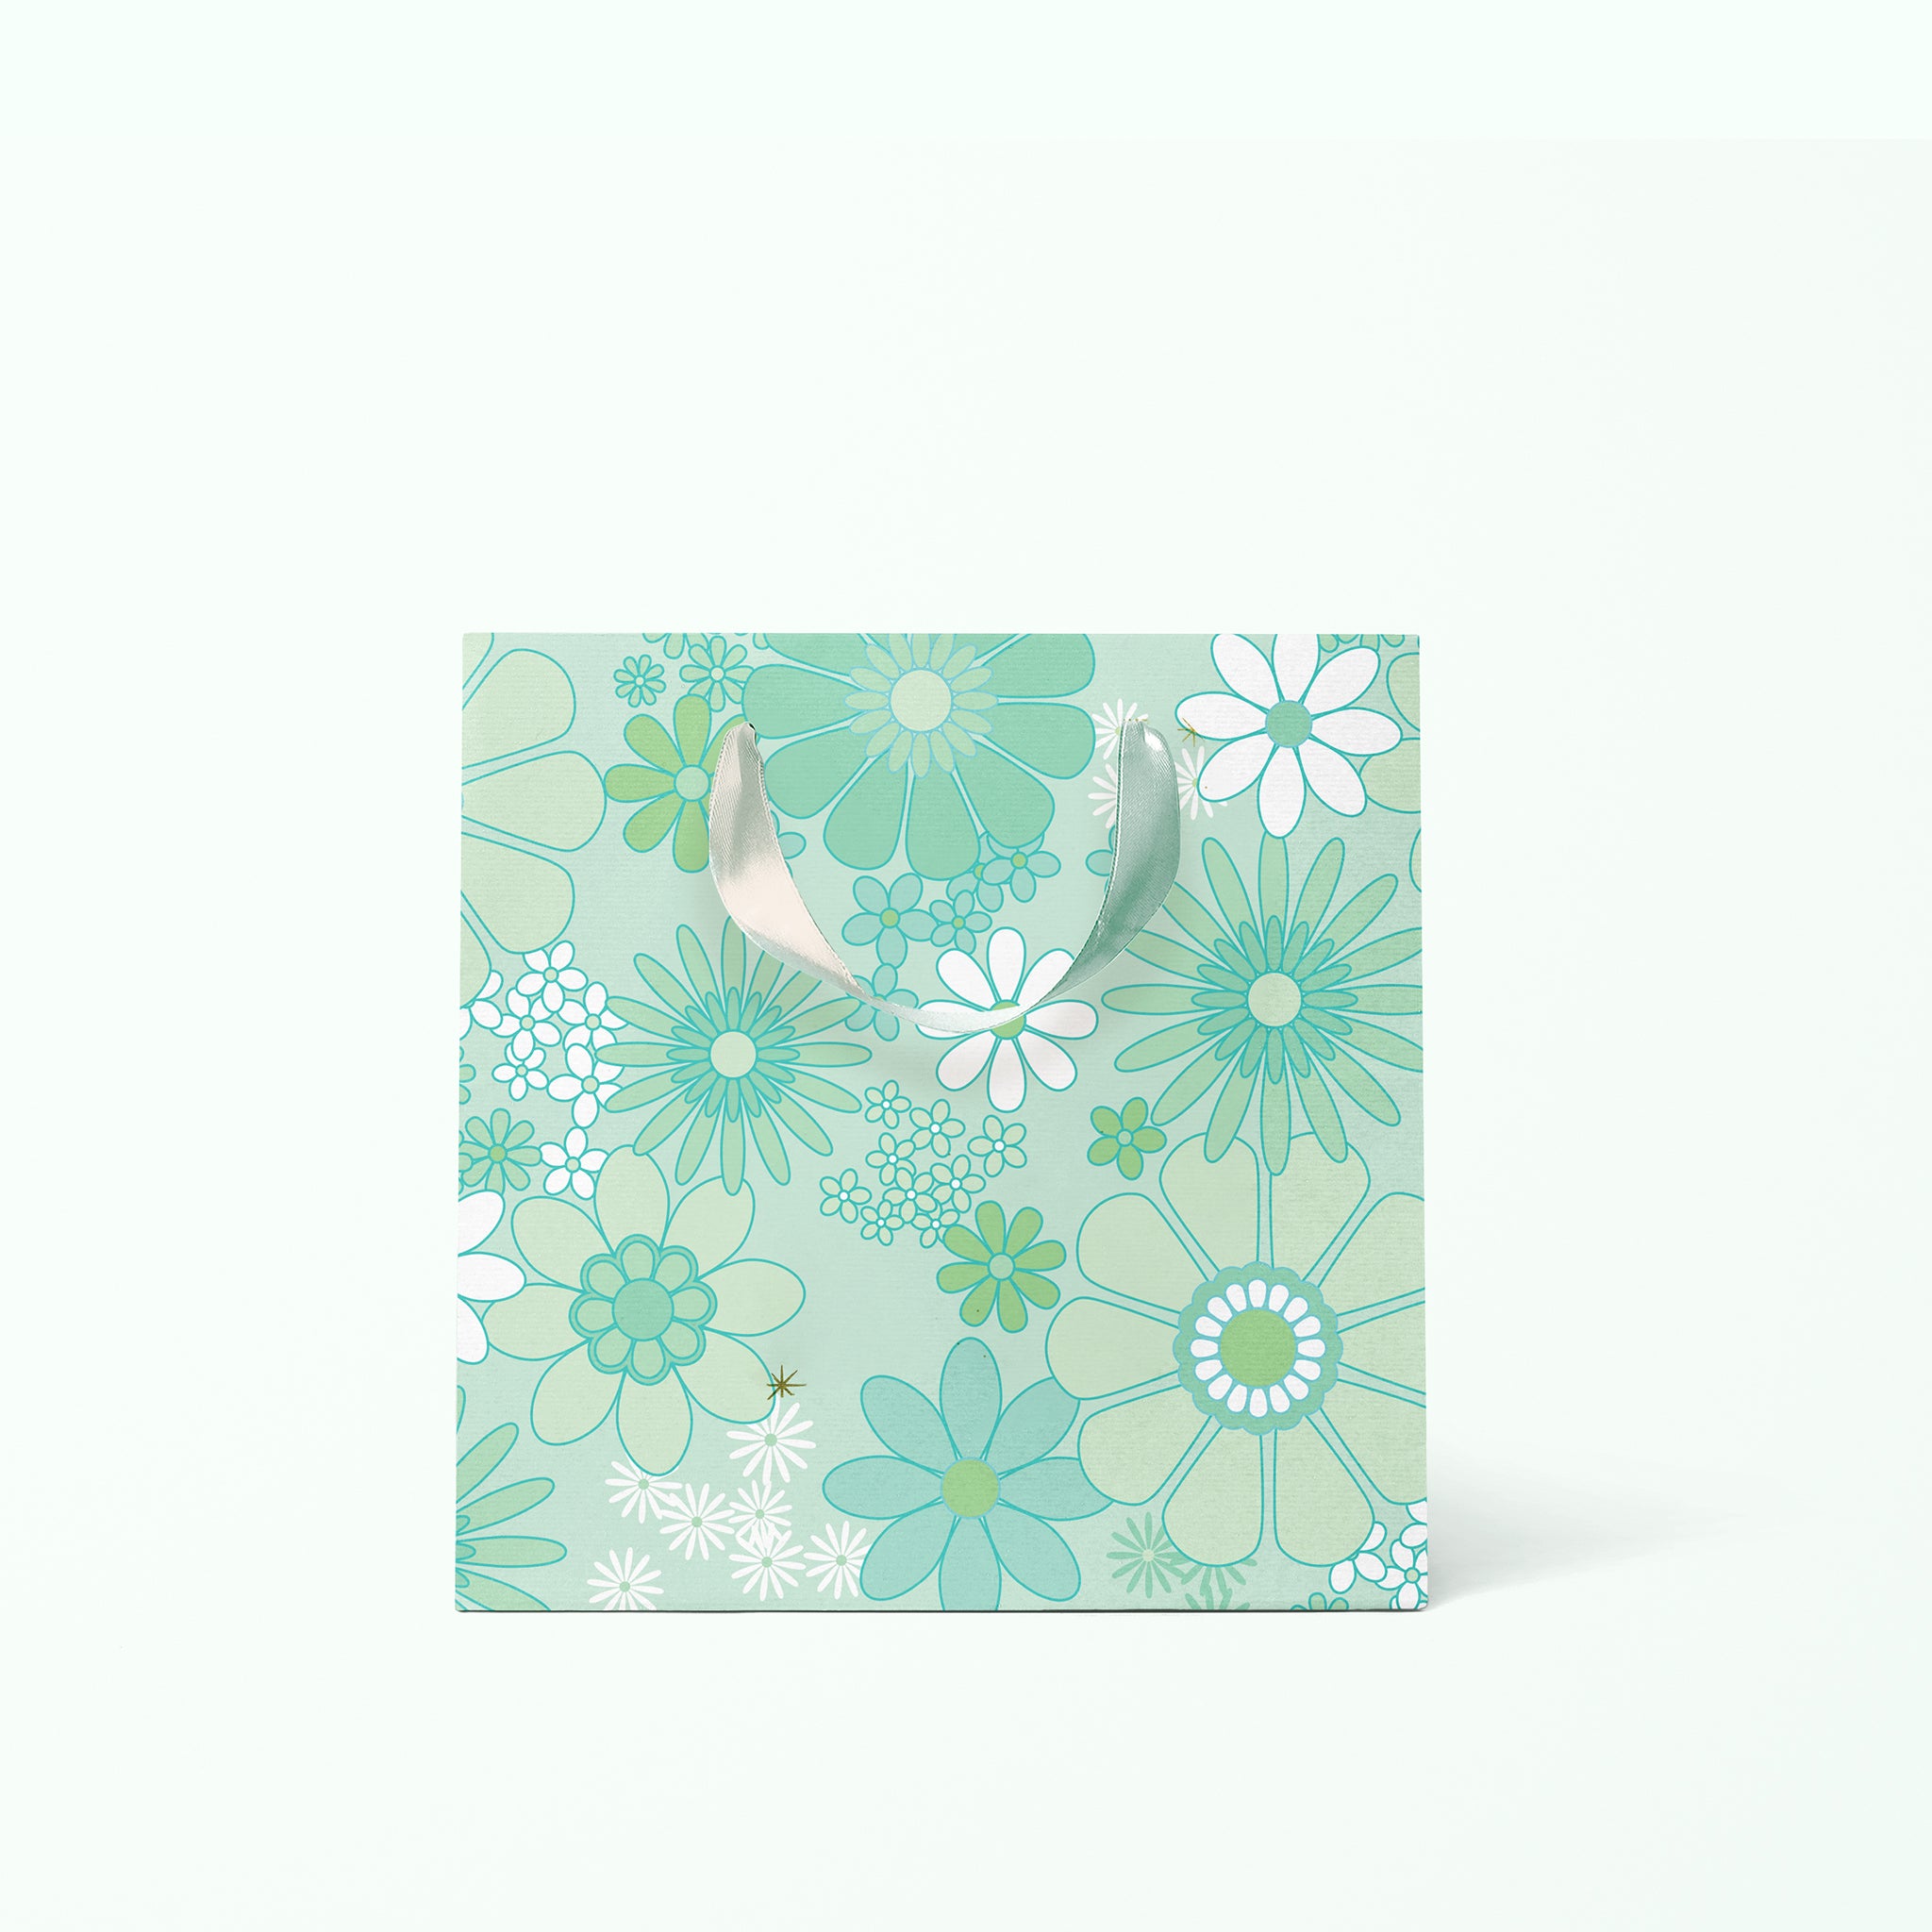 On a white background is a rendering of the small gift bag with a mint and white floral print and ribbon handles.